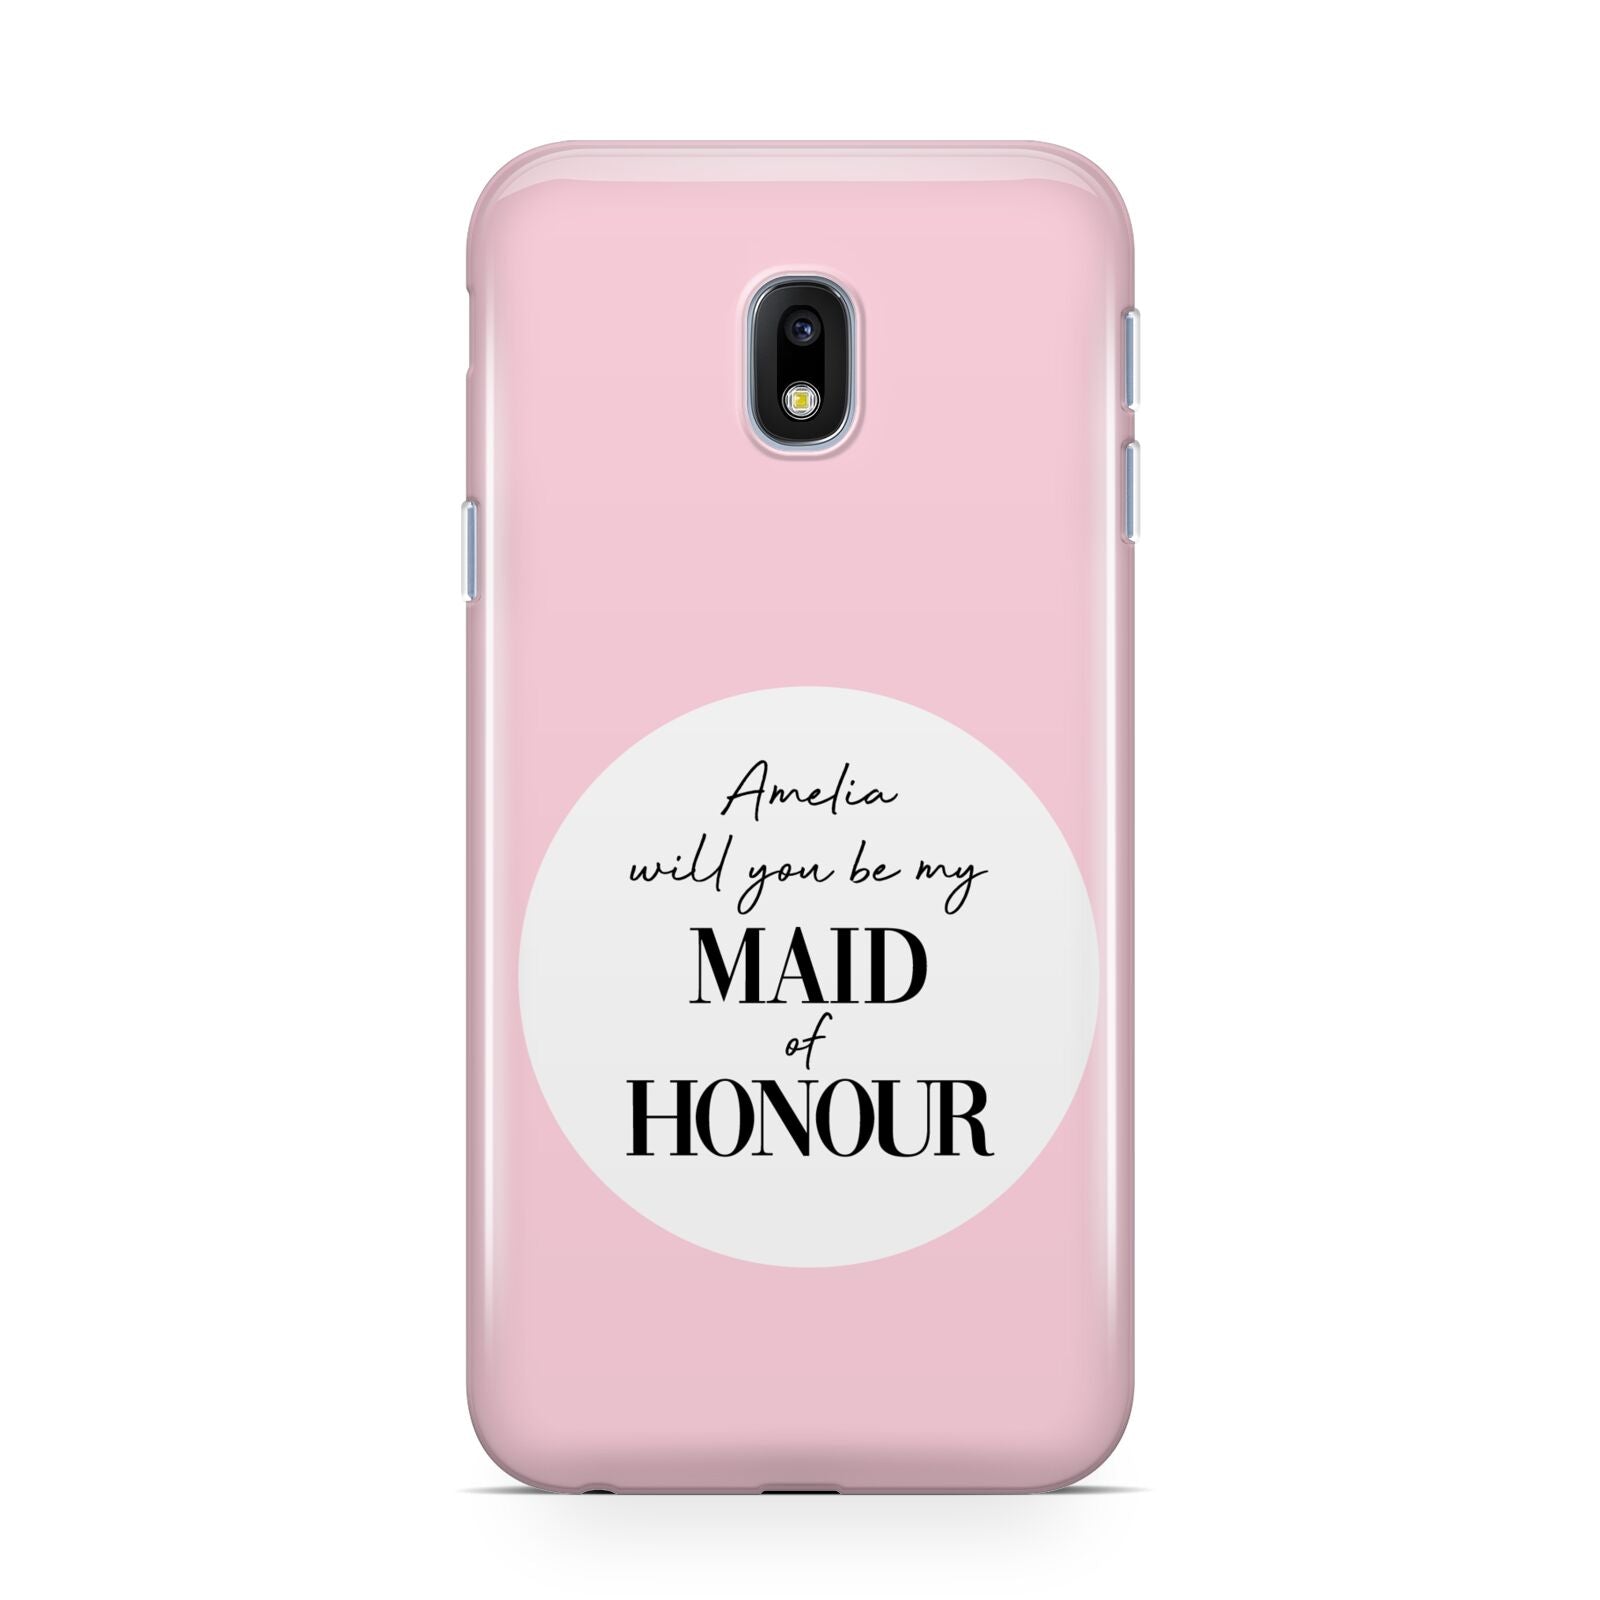 Will You Be My Maid Of Honour Samsung Galaxy J3 2017 Case